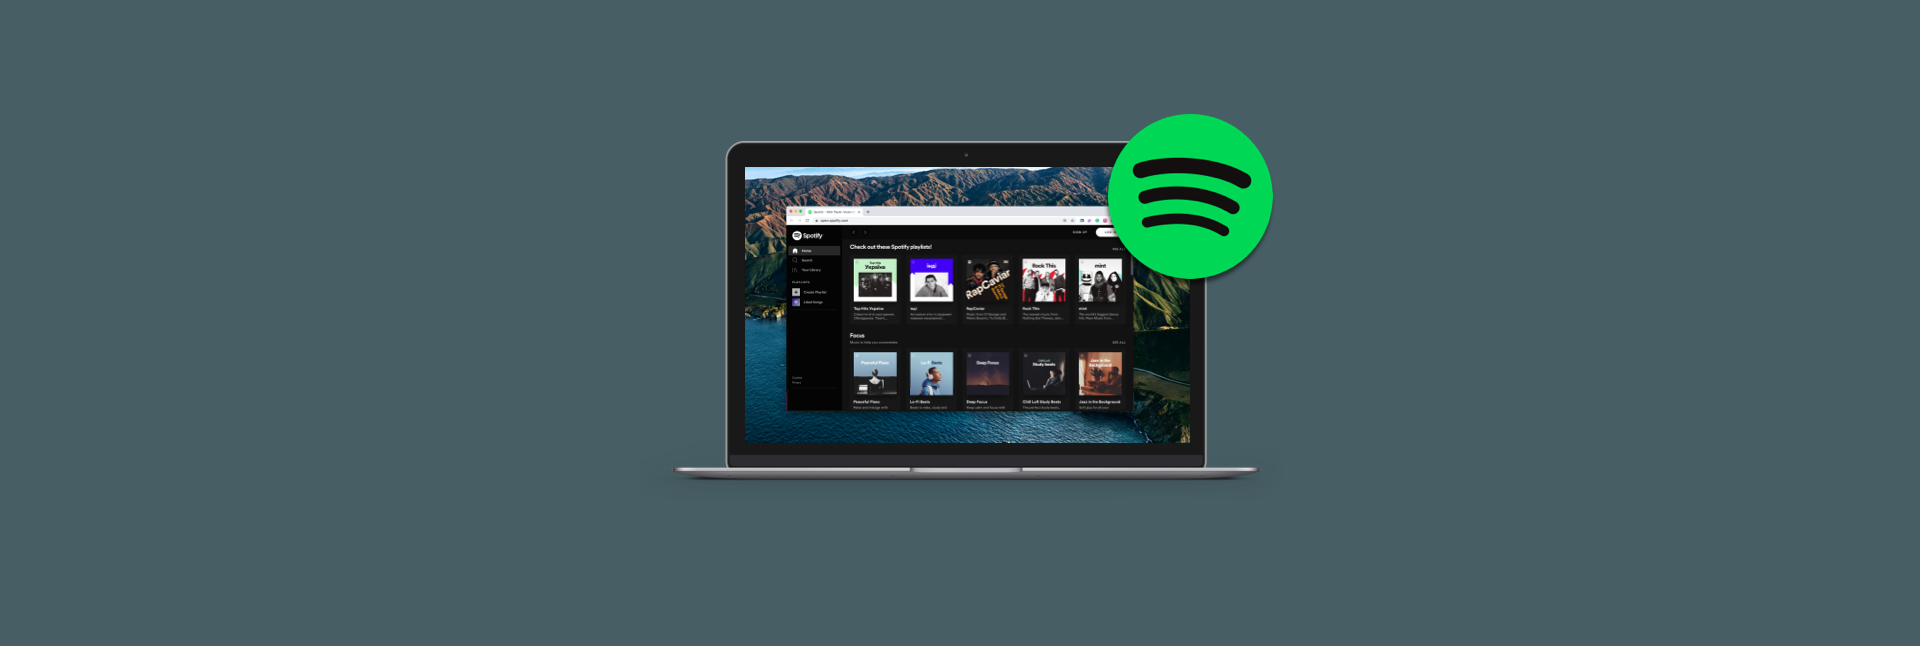 how to change playlist name on spotify web player